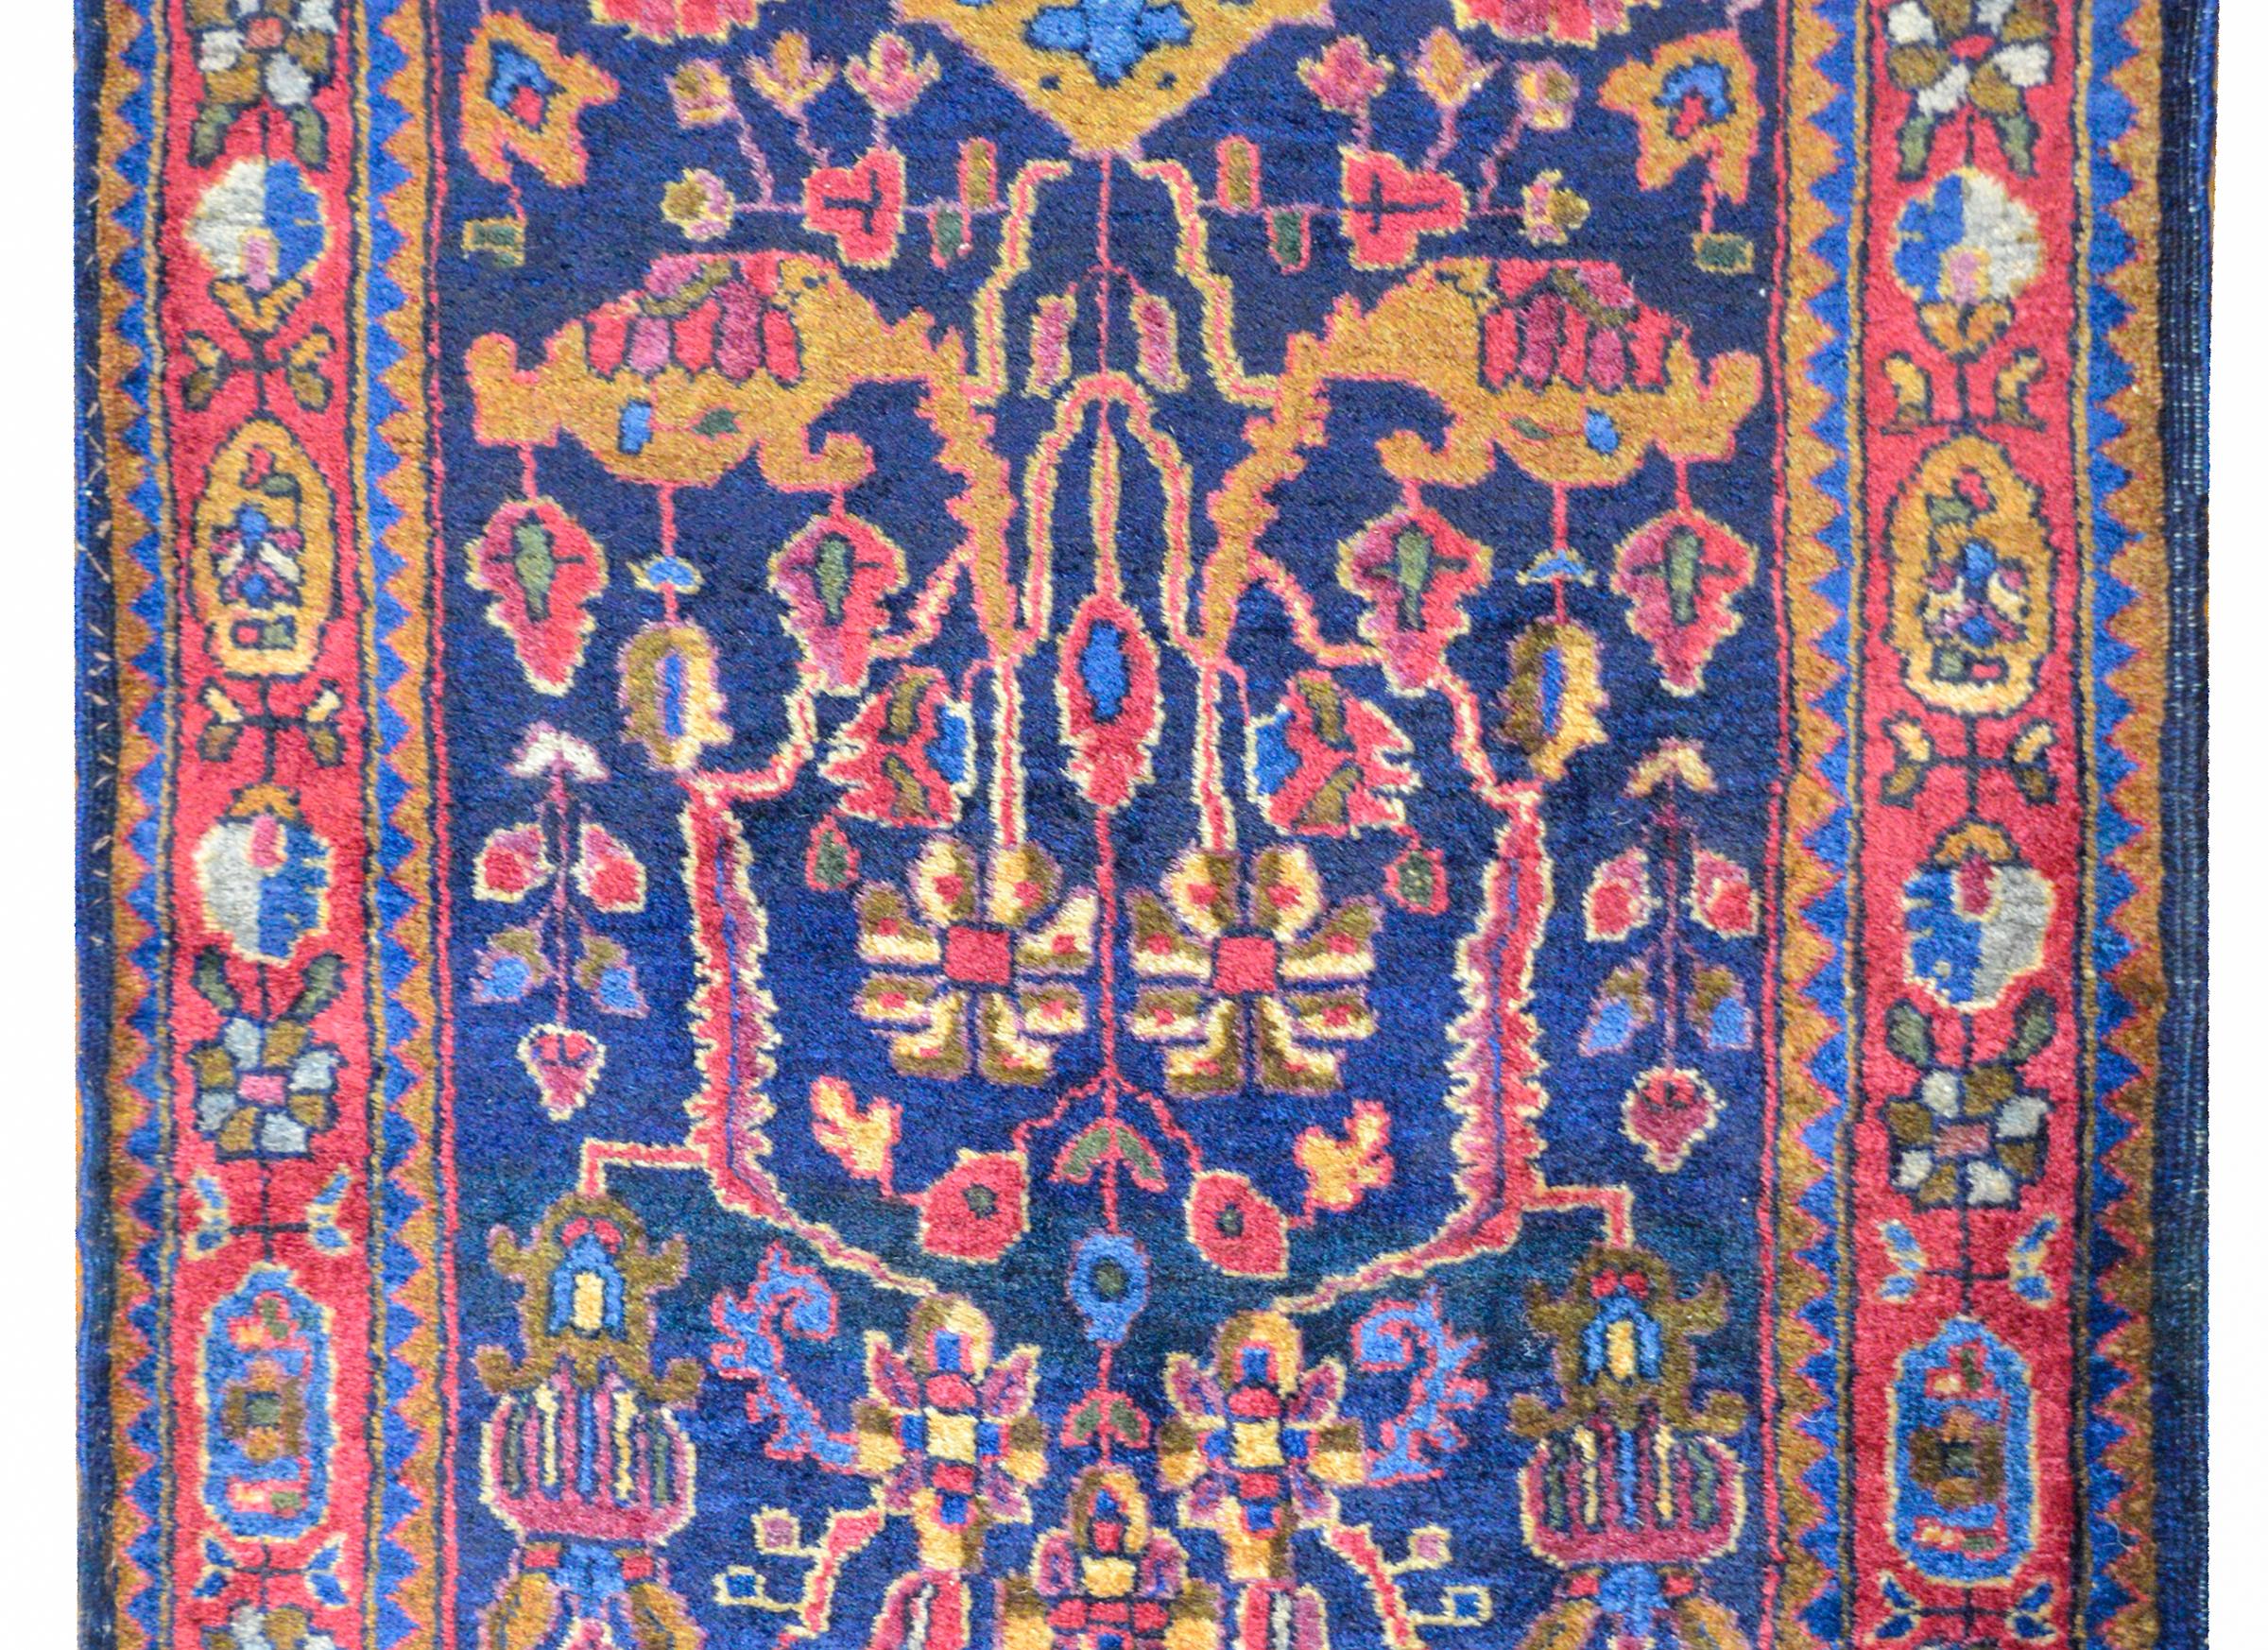 A wonderful early 20th century Persian Kashan rug with an all-over tribal floral and vine pattern woven in gold, light indigo, coral, brown, and cream, on a dark indigo background, surrounded by a complex floral patterned border flanked by pairs of